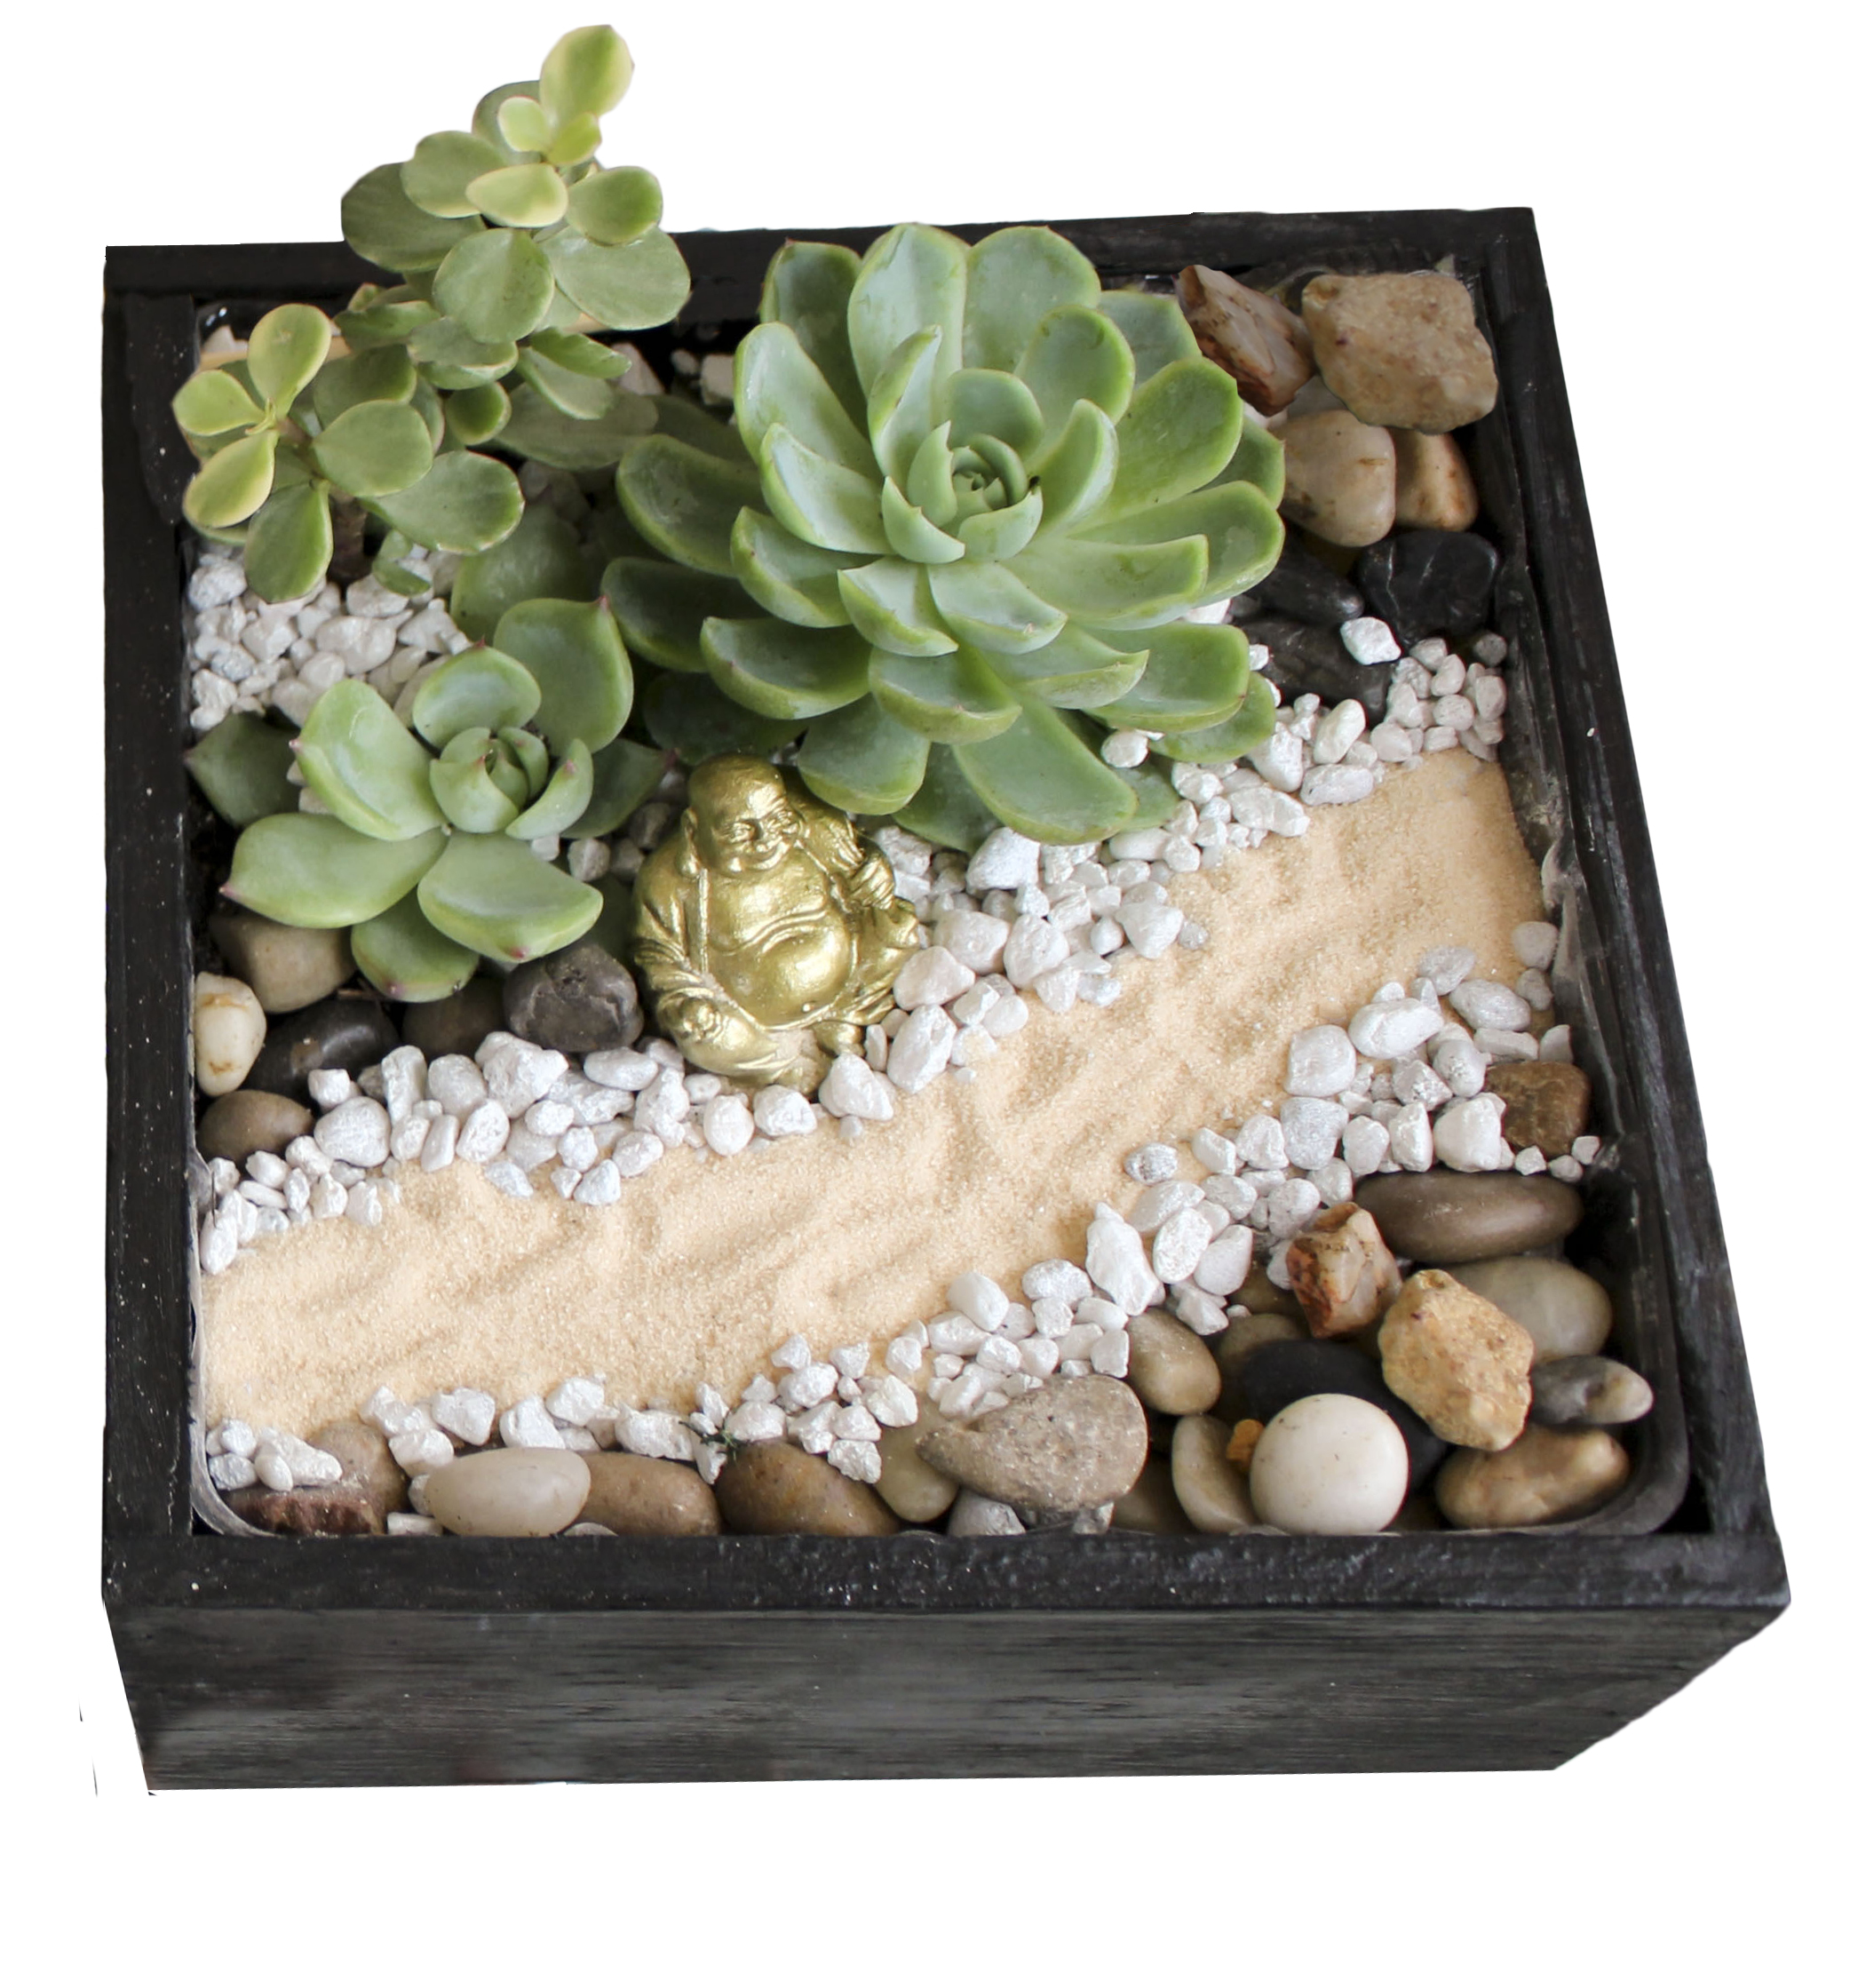 A The Path to Buddha Zen Garden plant nite project by Yaymaker